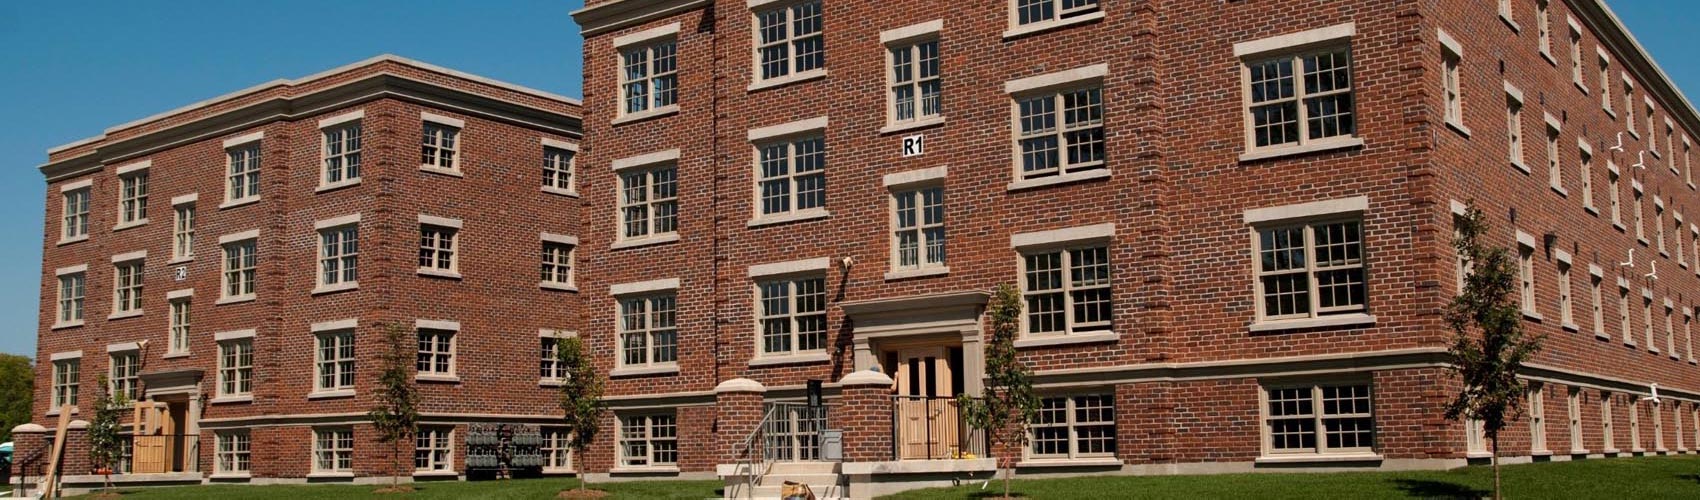 Exterior of the student residence buildings at the Georgian College Orillia Campus